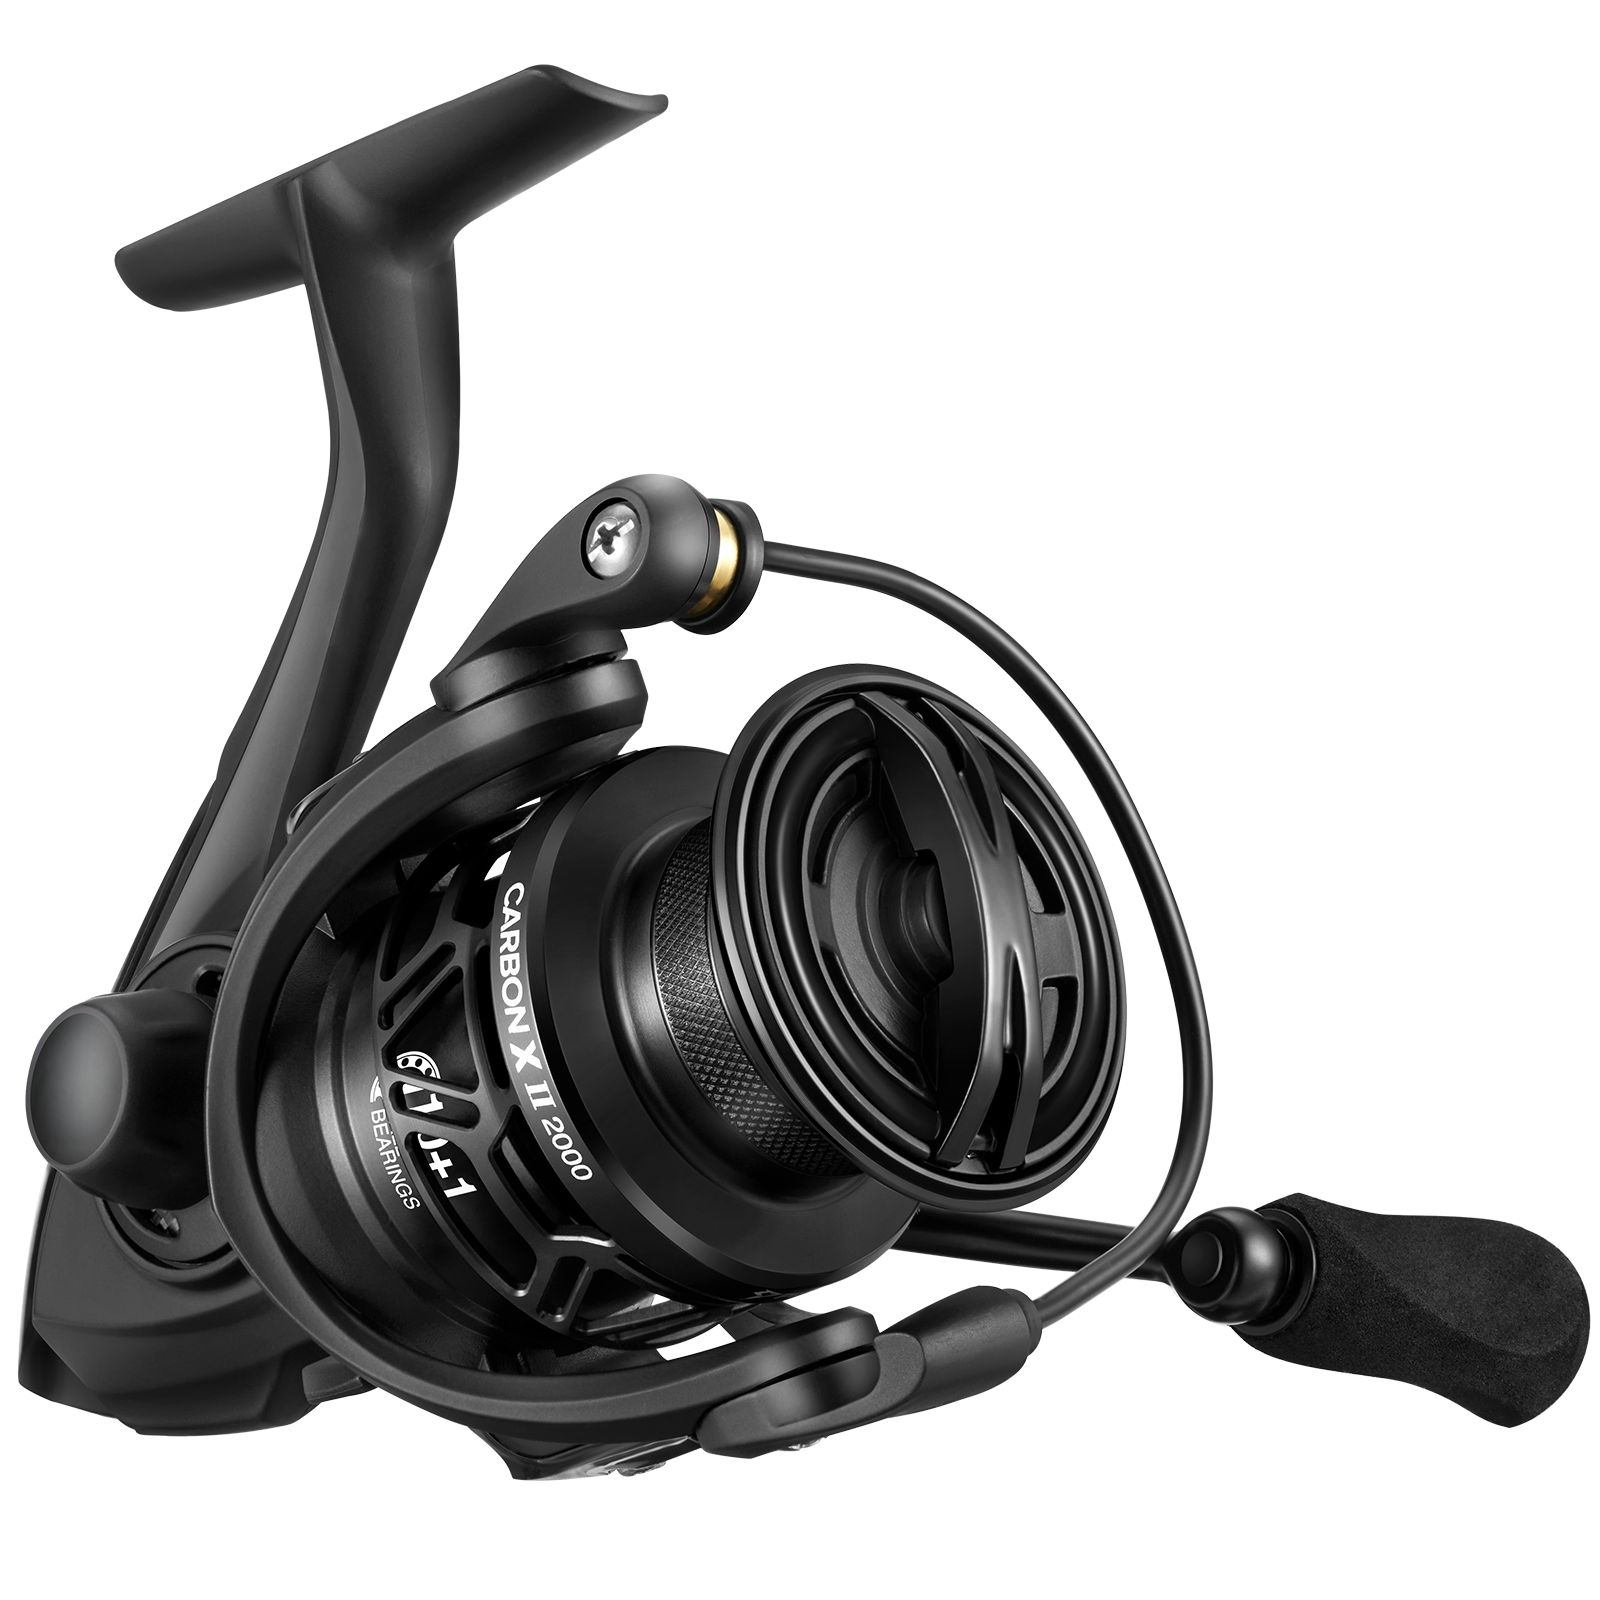 Piscifun Carbon X 2 1000 Spinning Reel